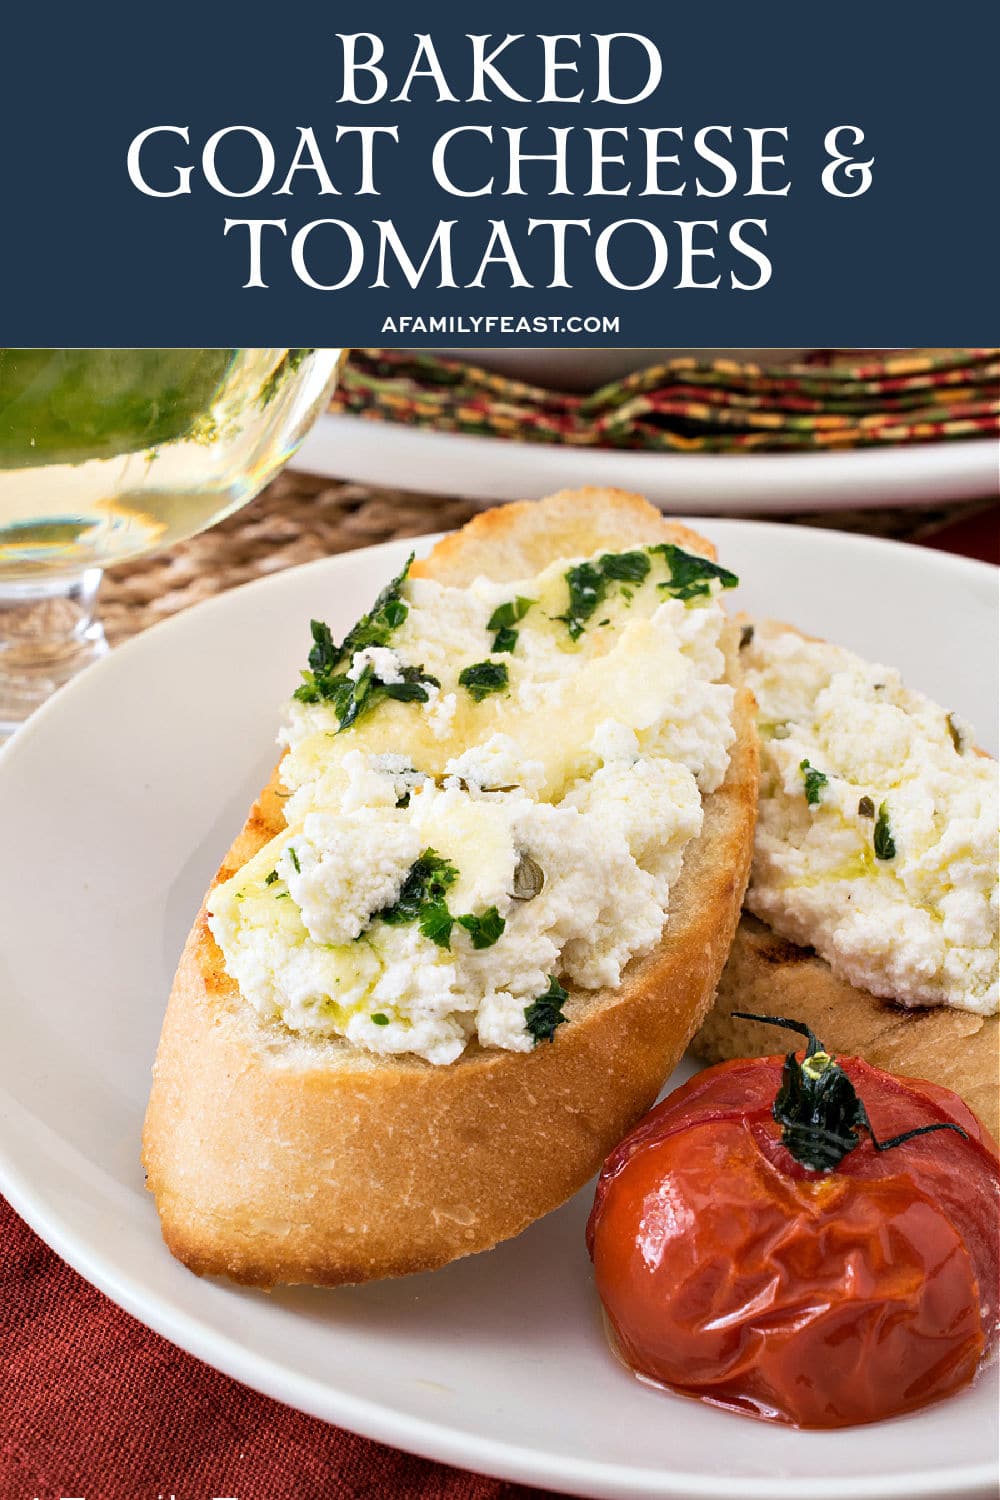 Baked Goat Cheese & Tomatoes